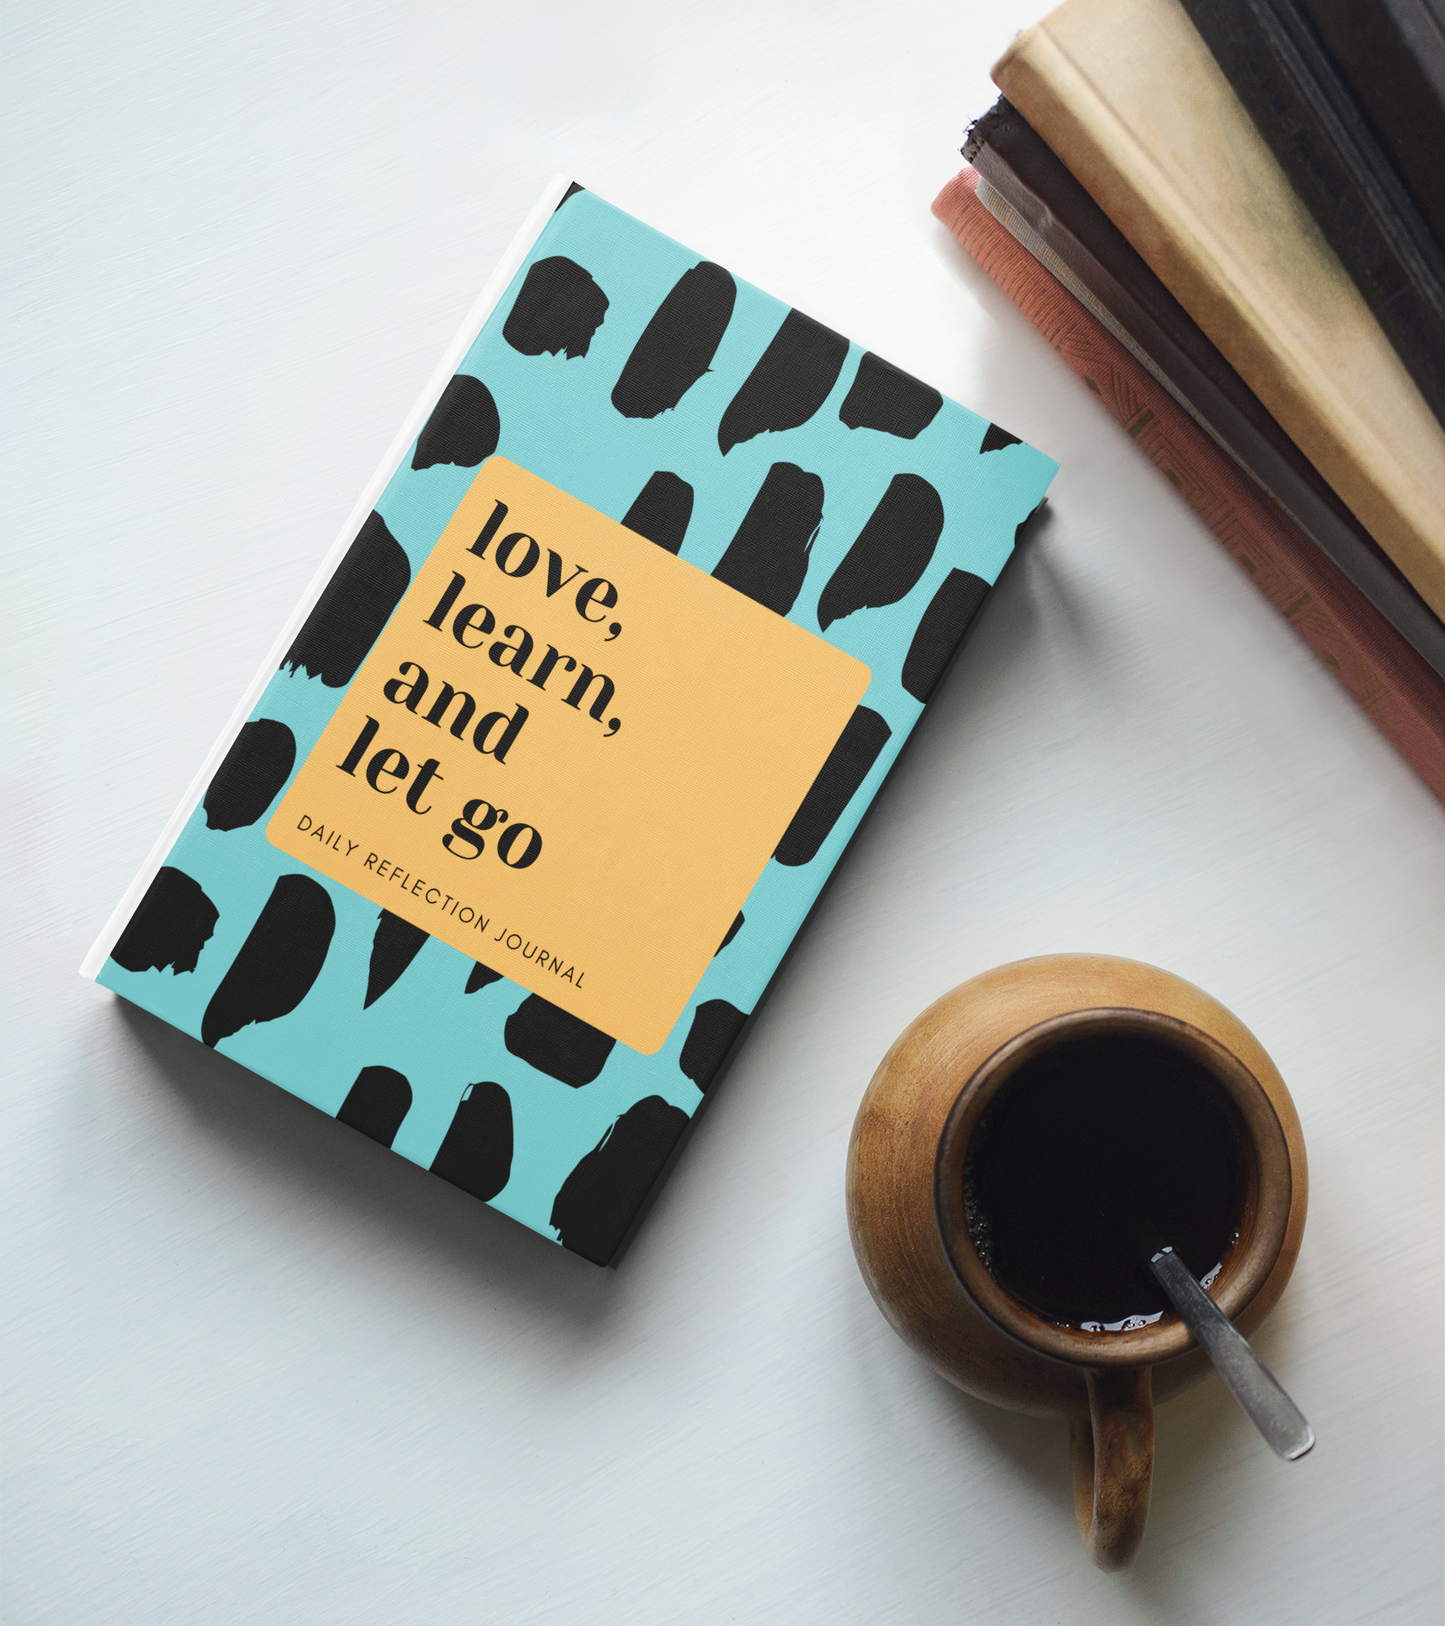 Love, Learn, and Let Go Journal - Blue with Black Spots